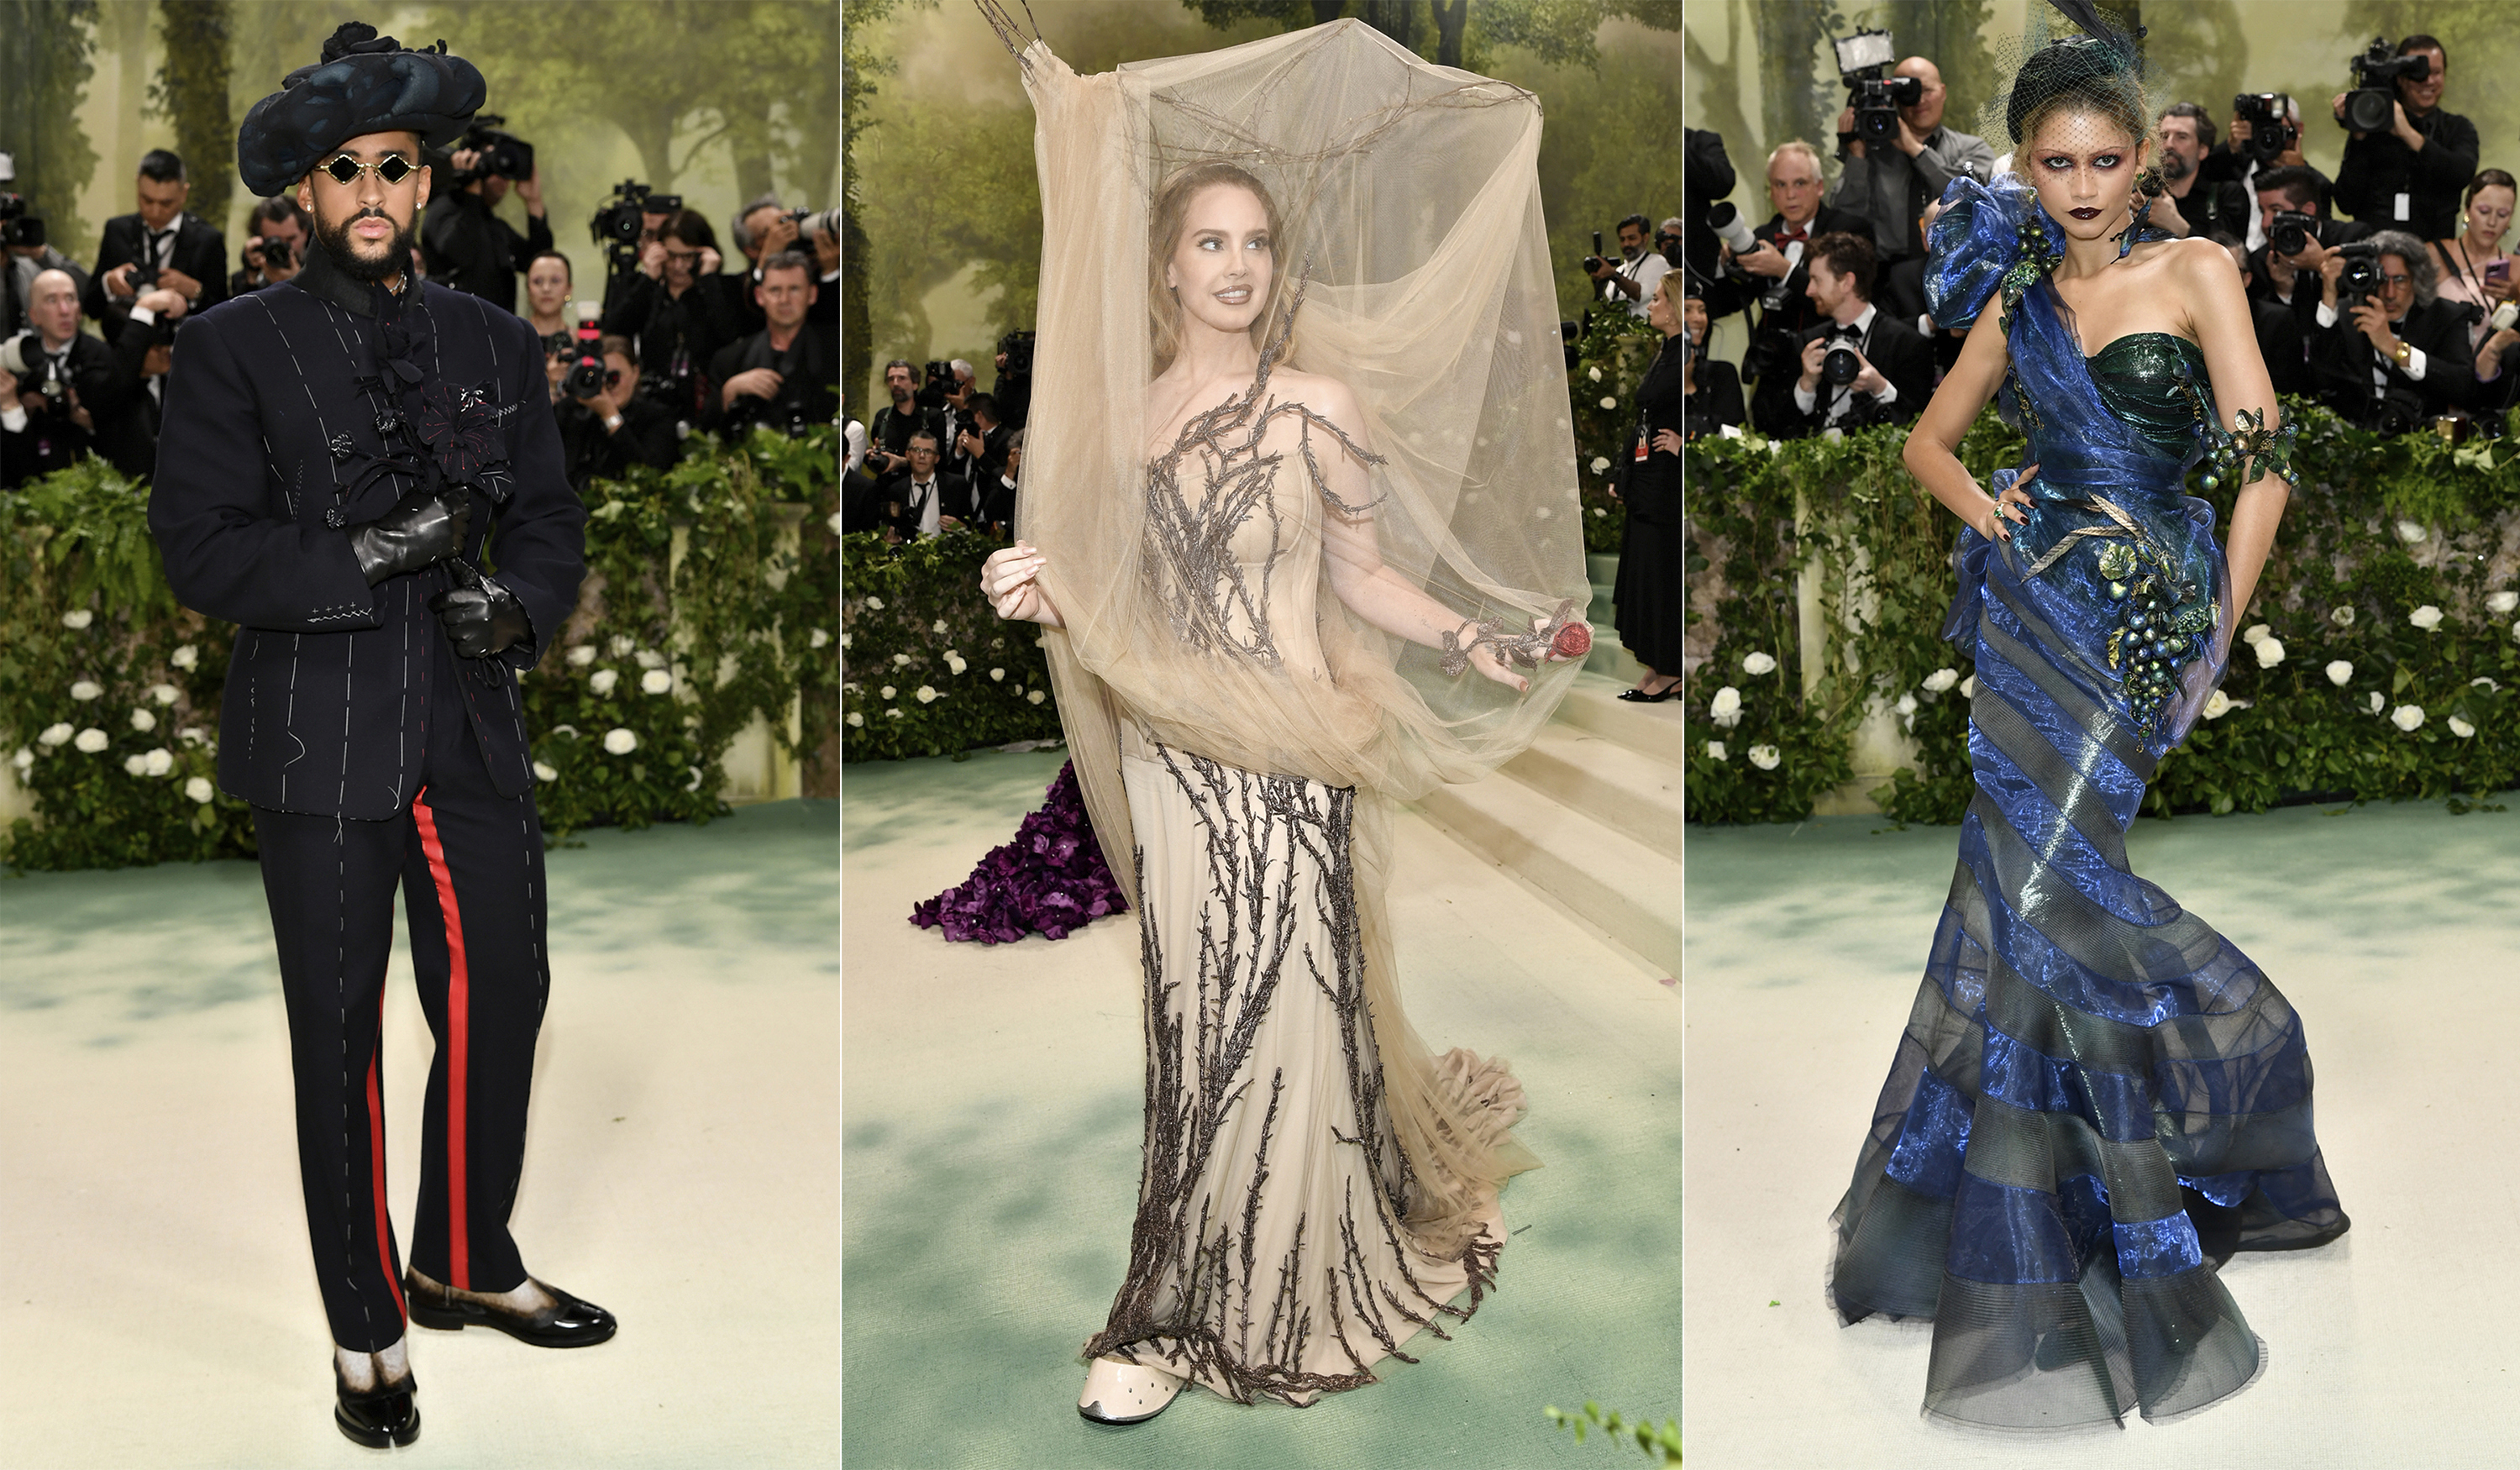 The Met Gala’s flowery theme went in all directions Metro US